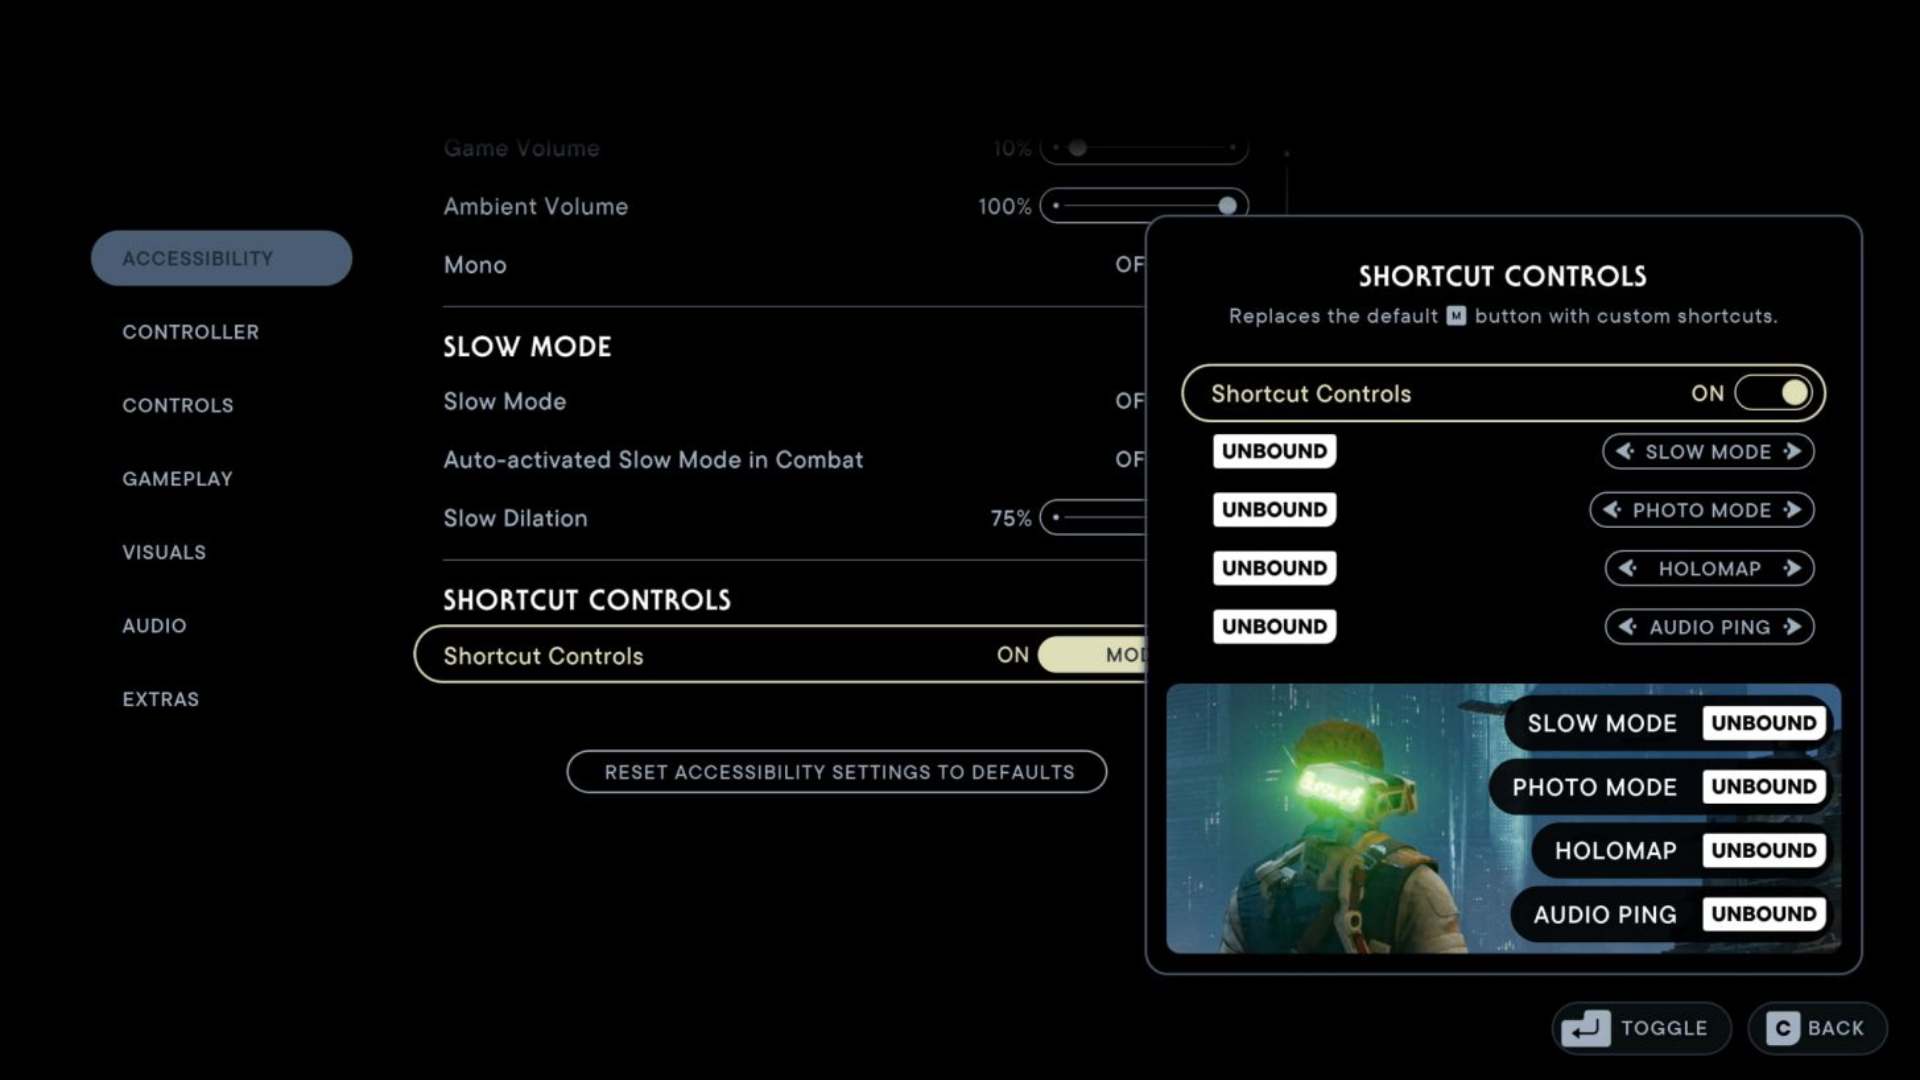 Screenshot of Star Wars accessibility settings and slow mode options shared by EA 